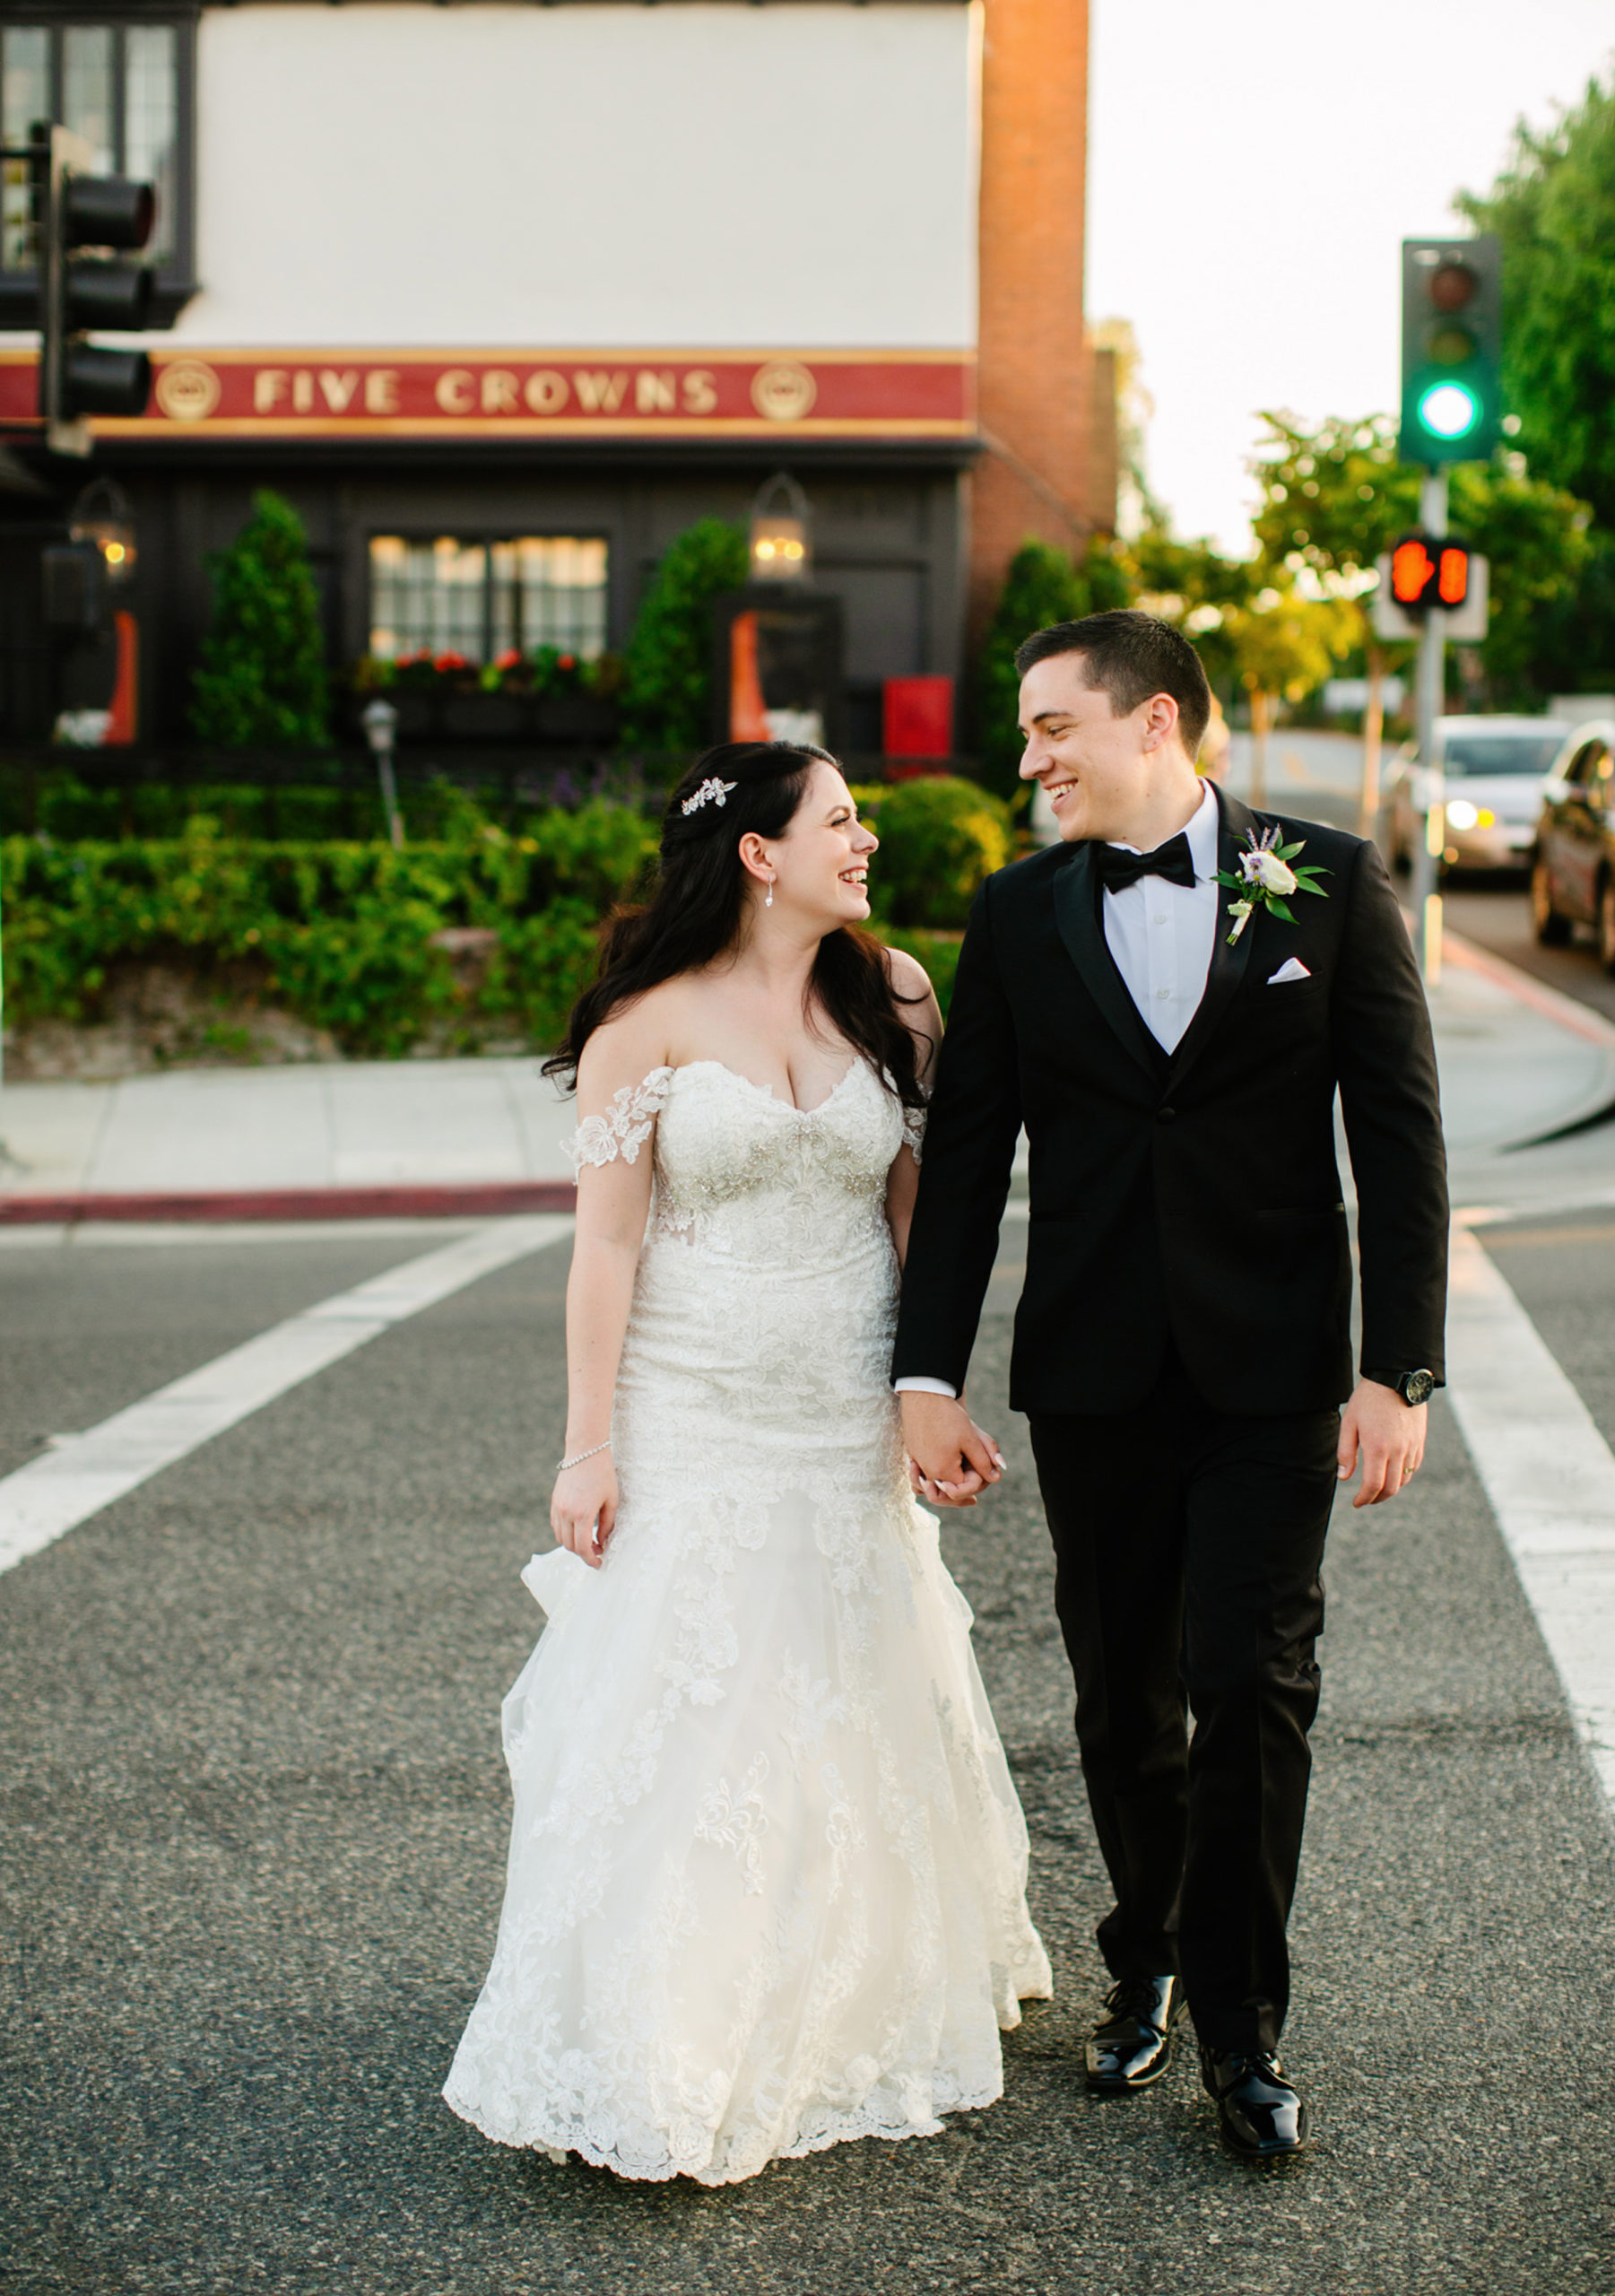 Bride and groom smiling at each other while crossing the street near Five Crowns in Corona del Mar, taken by Christopher Brown